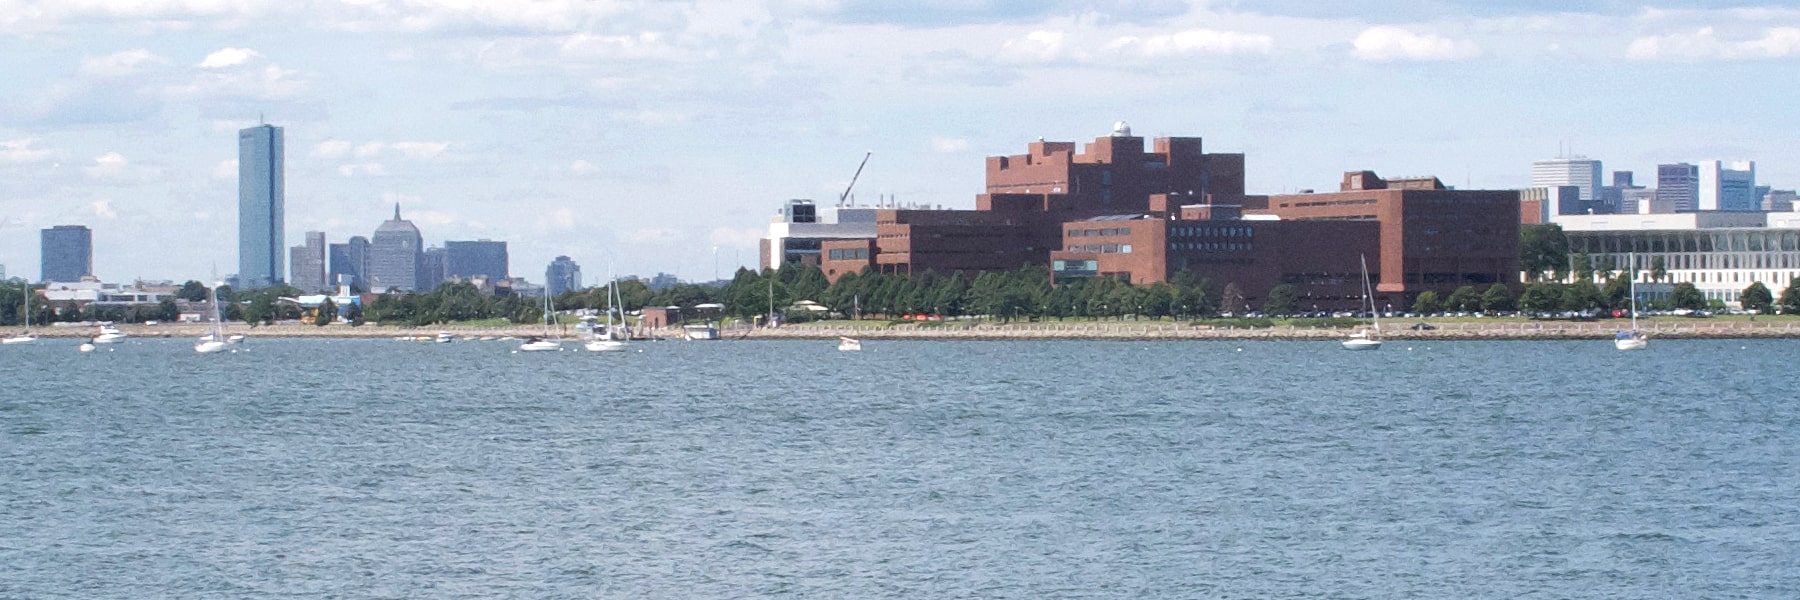 view of UMass Boston campus from Dorchester Bay harbor